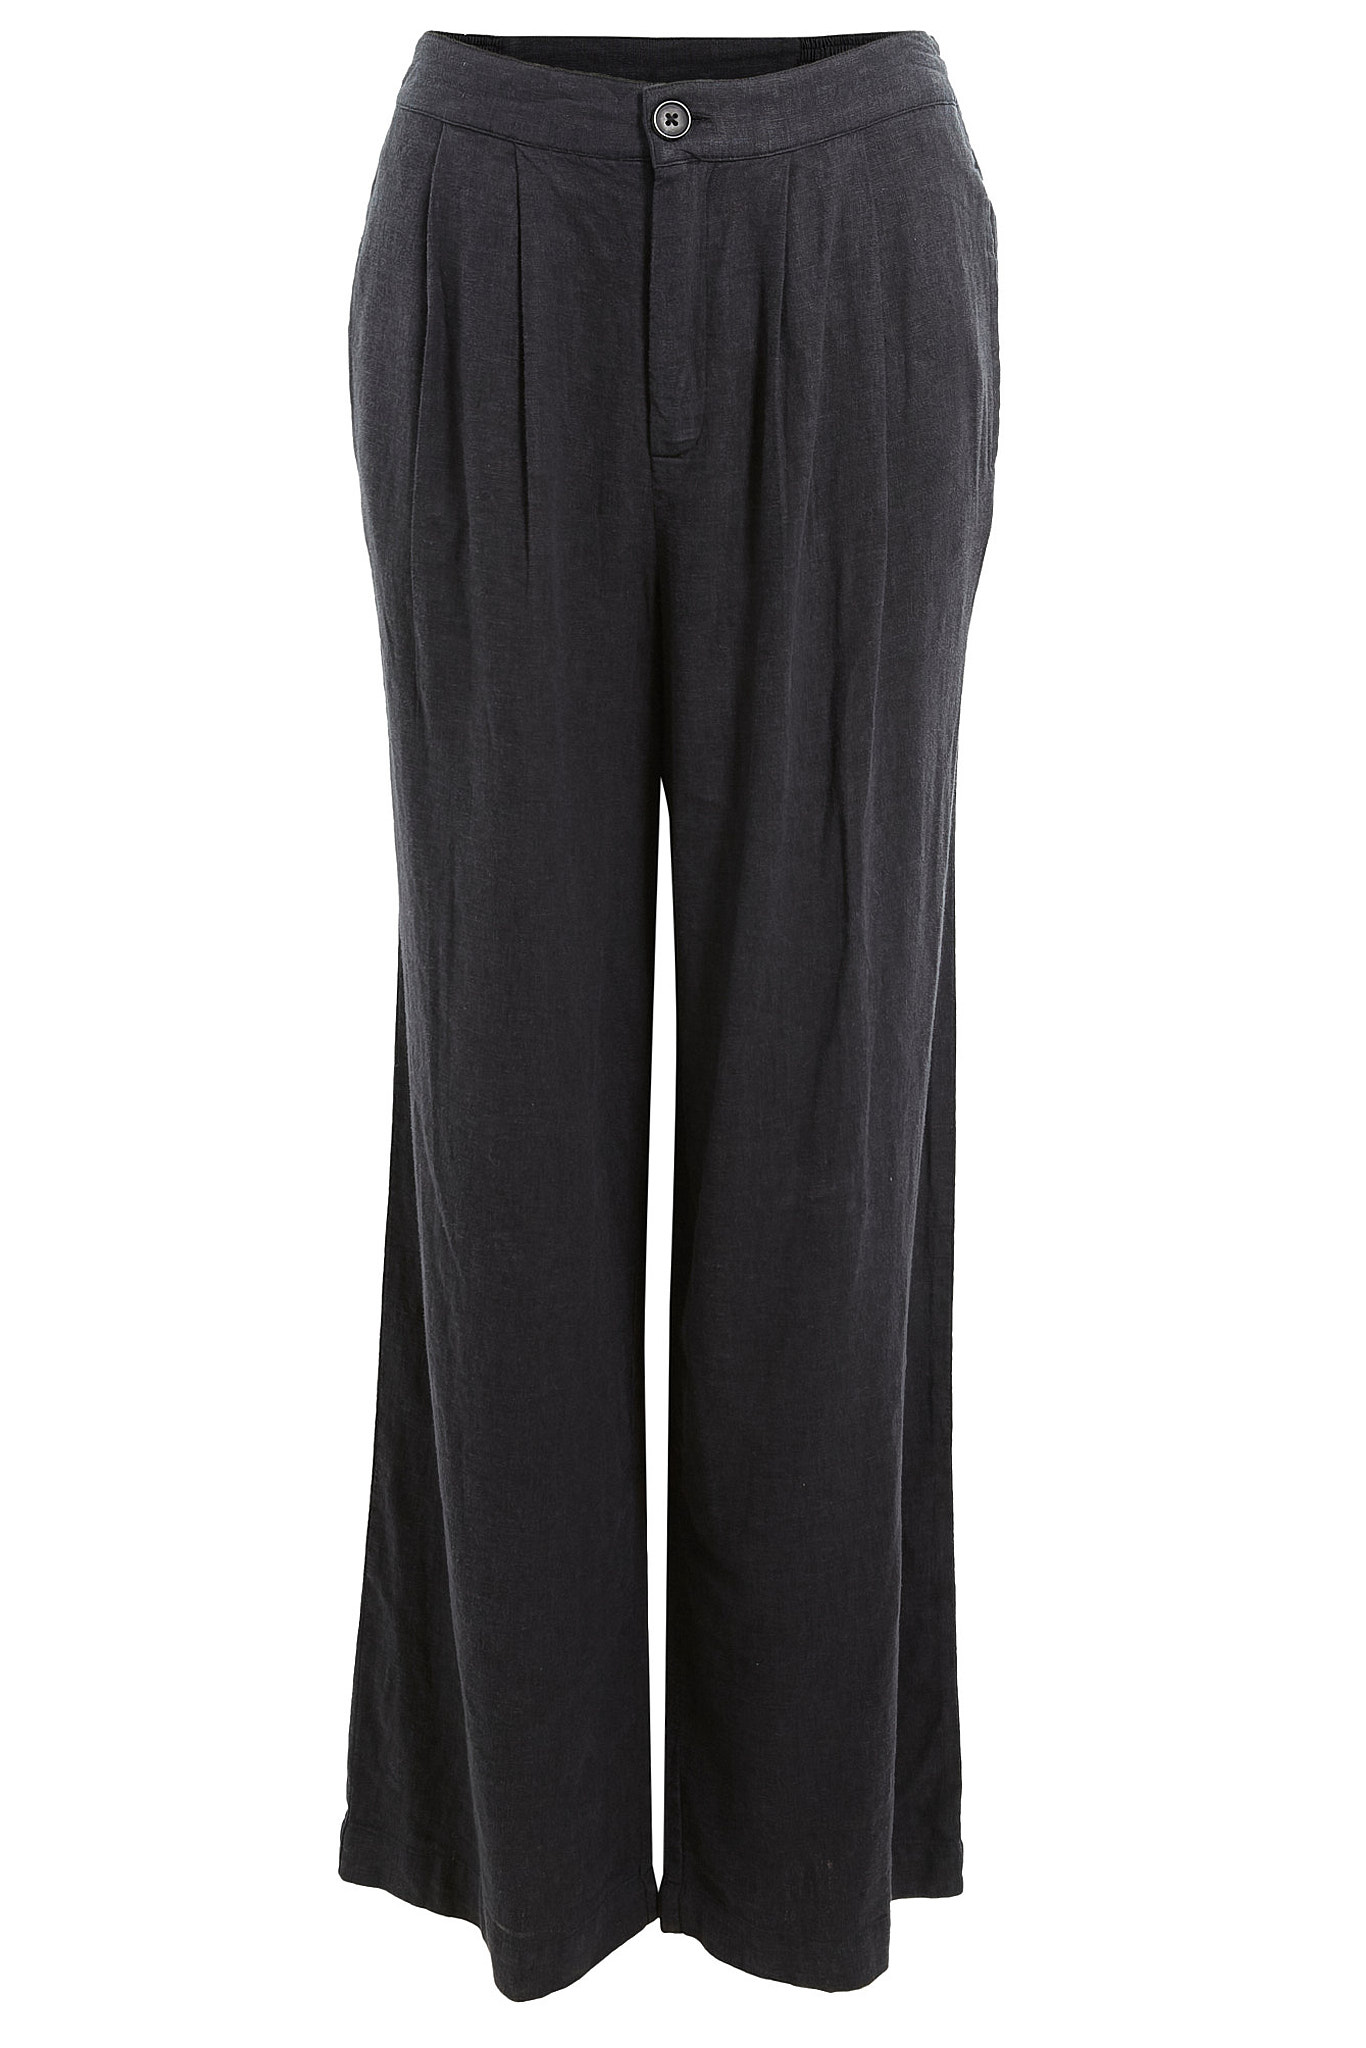 Thread & Supply High Rise Trousers